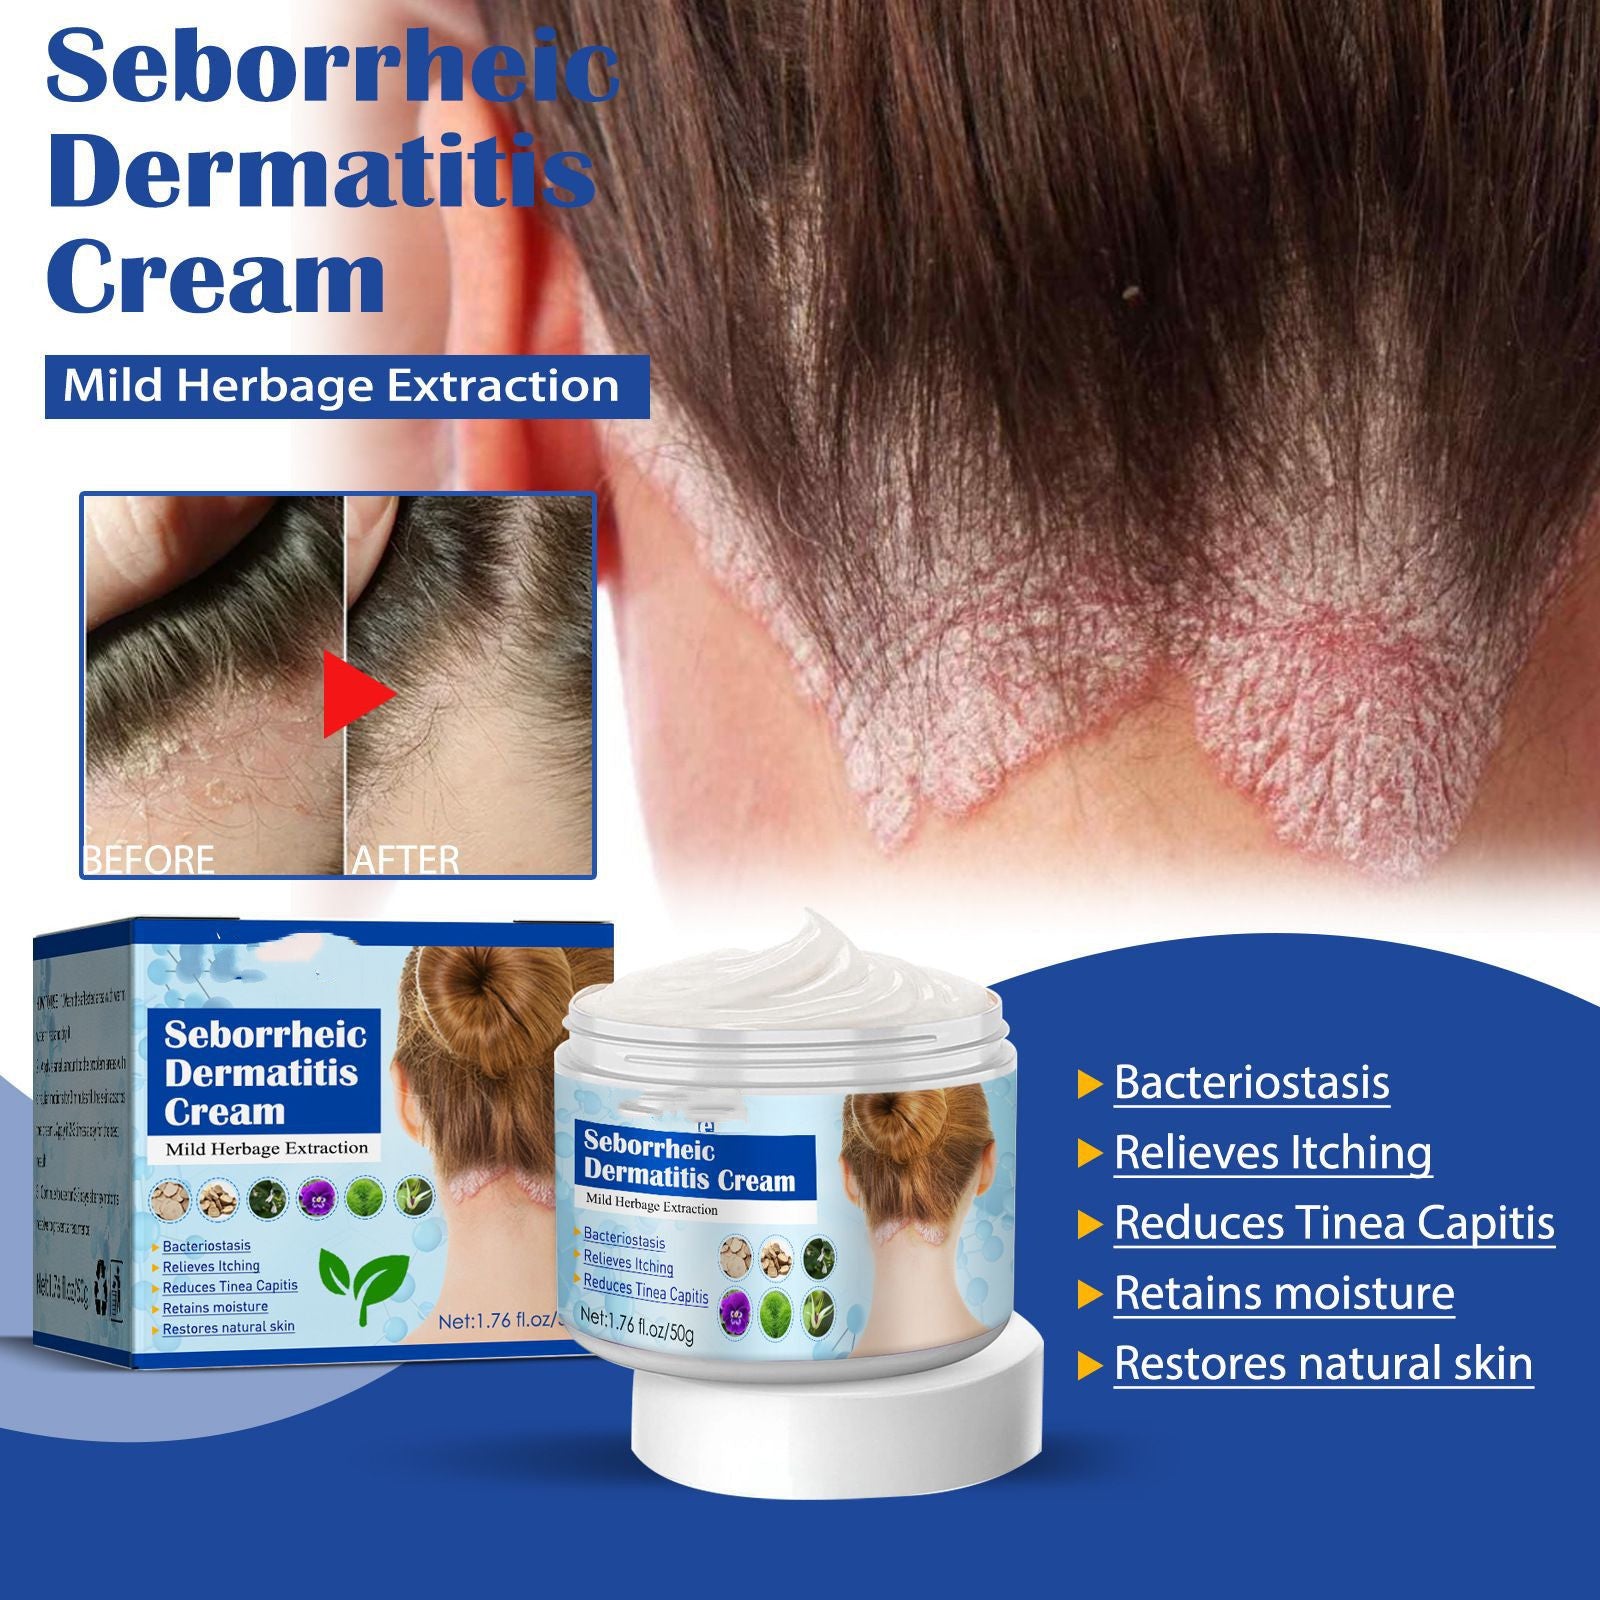       Seborrheic Skin Cream: Soothes Head Acne and Itch, Promotes Repair – BEAUTY NET